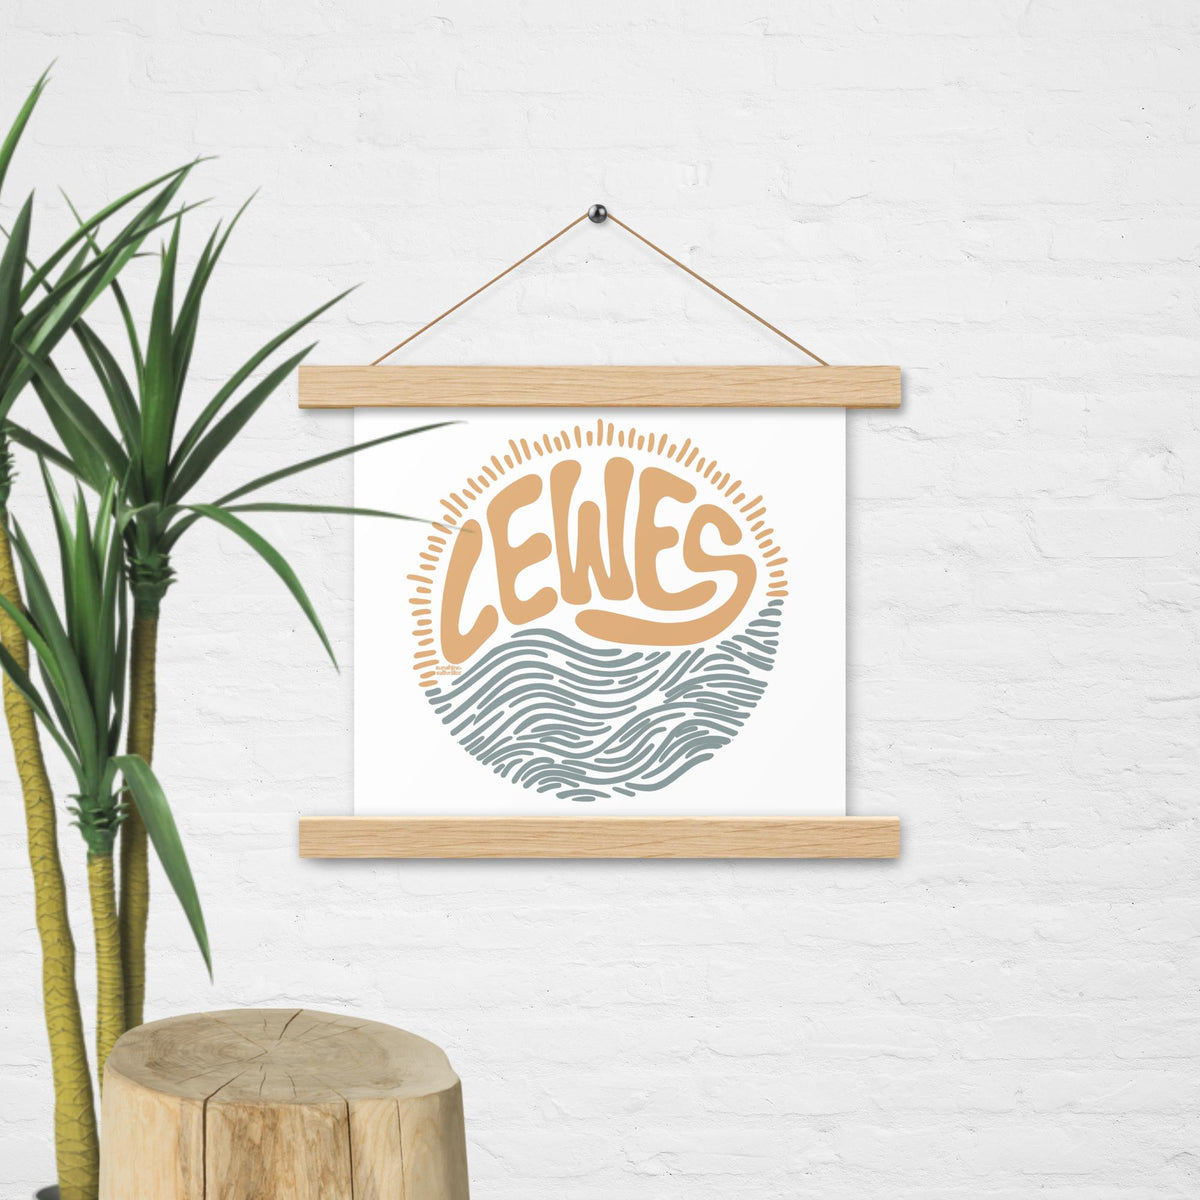 Lewes Sun + Waves | Wall Hanging